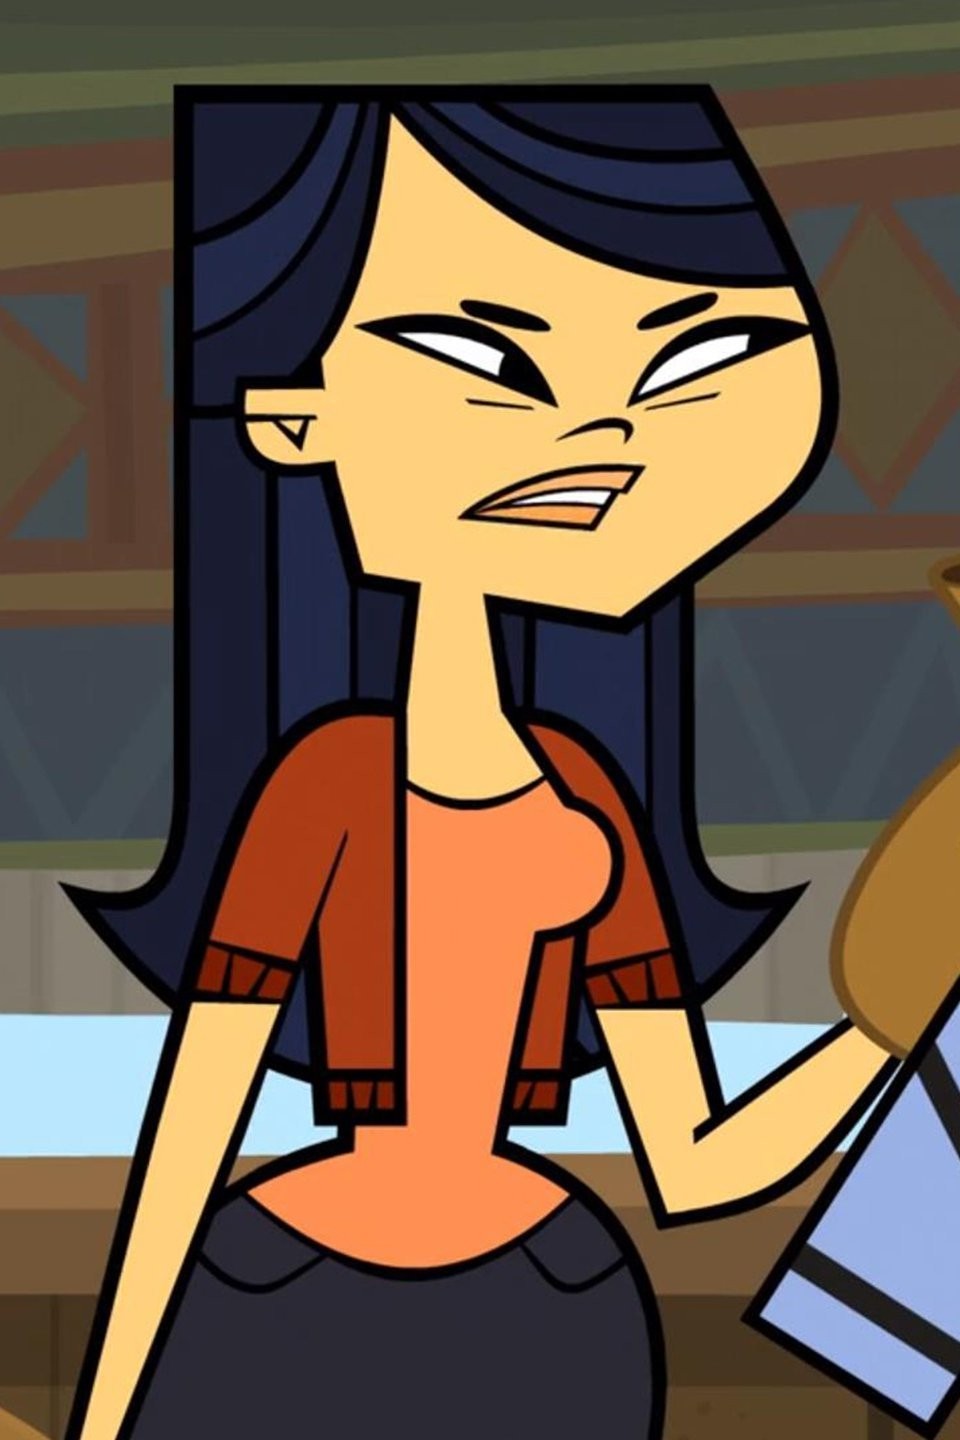 Total Drama Presents: The Ridonculous Race Episode 1 - None Down, Eighteen  to Go Part 1 